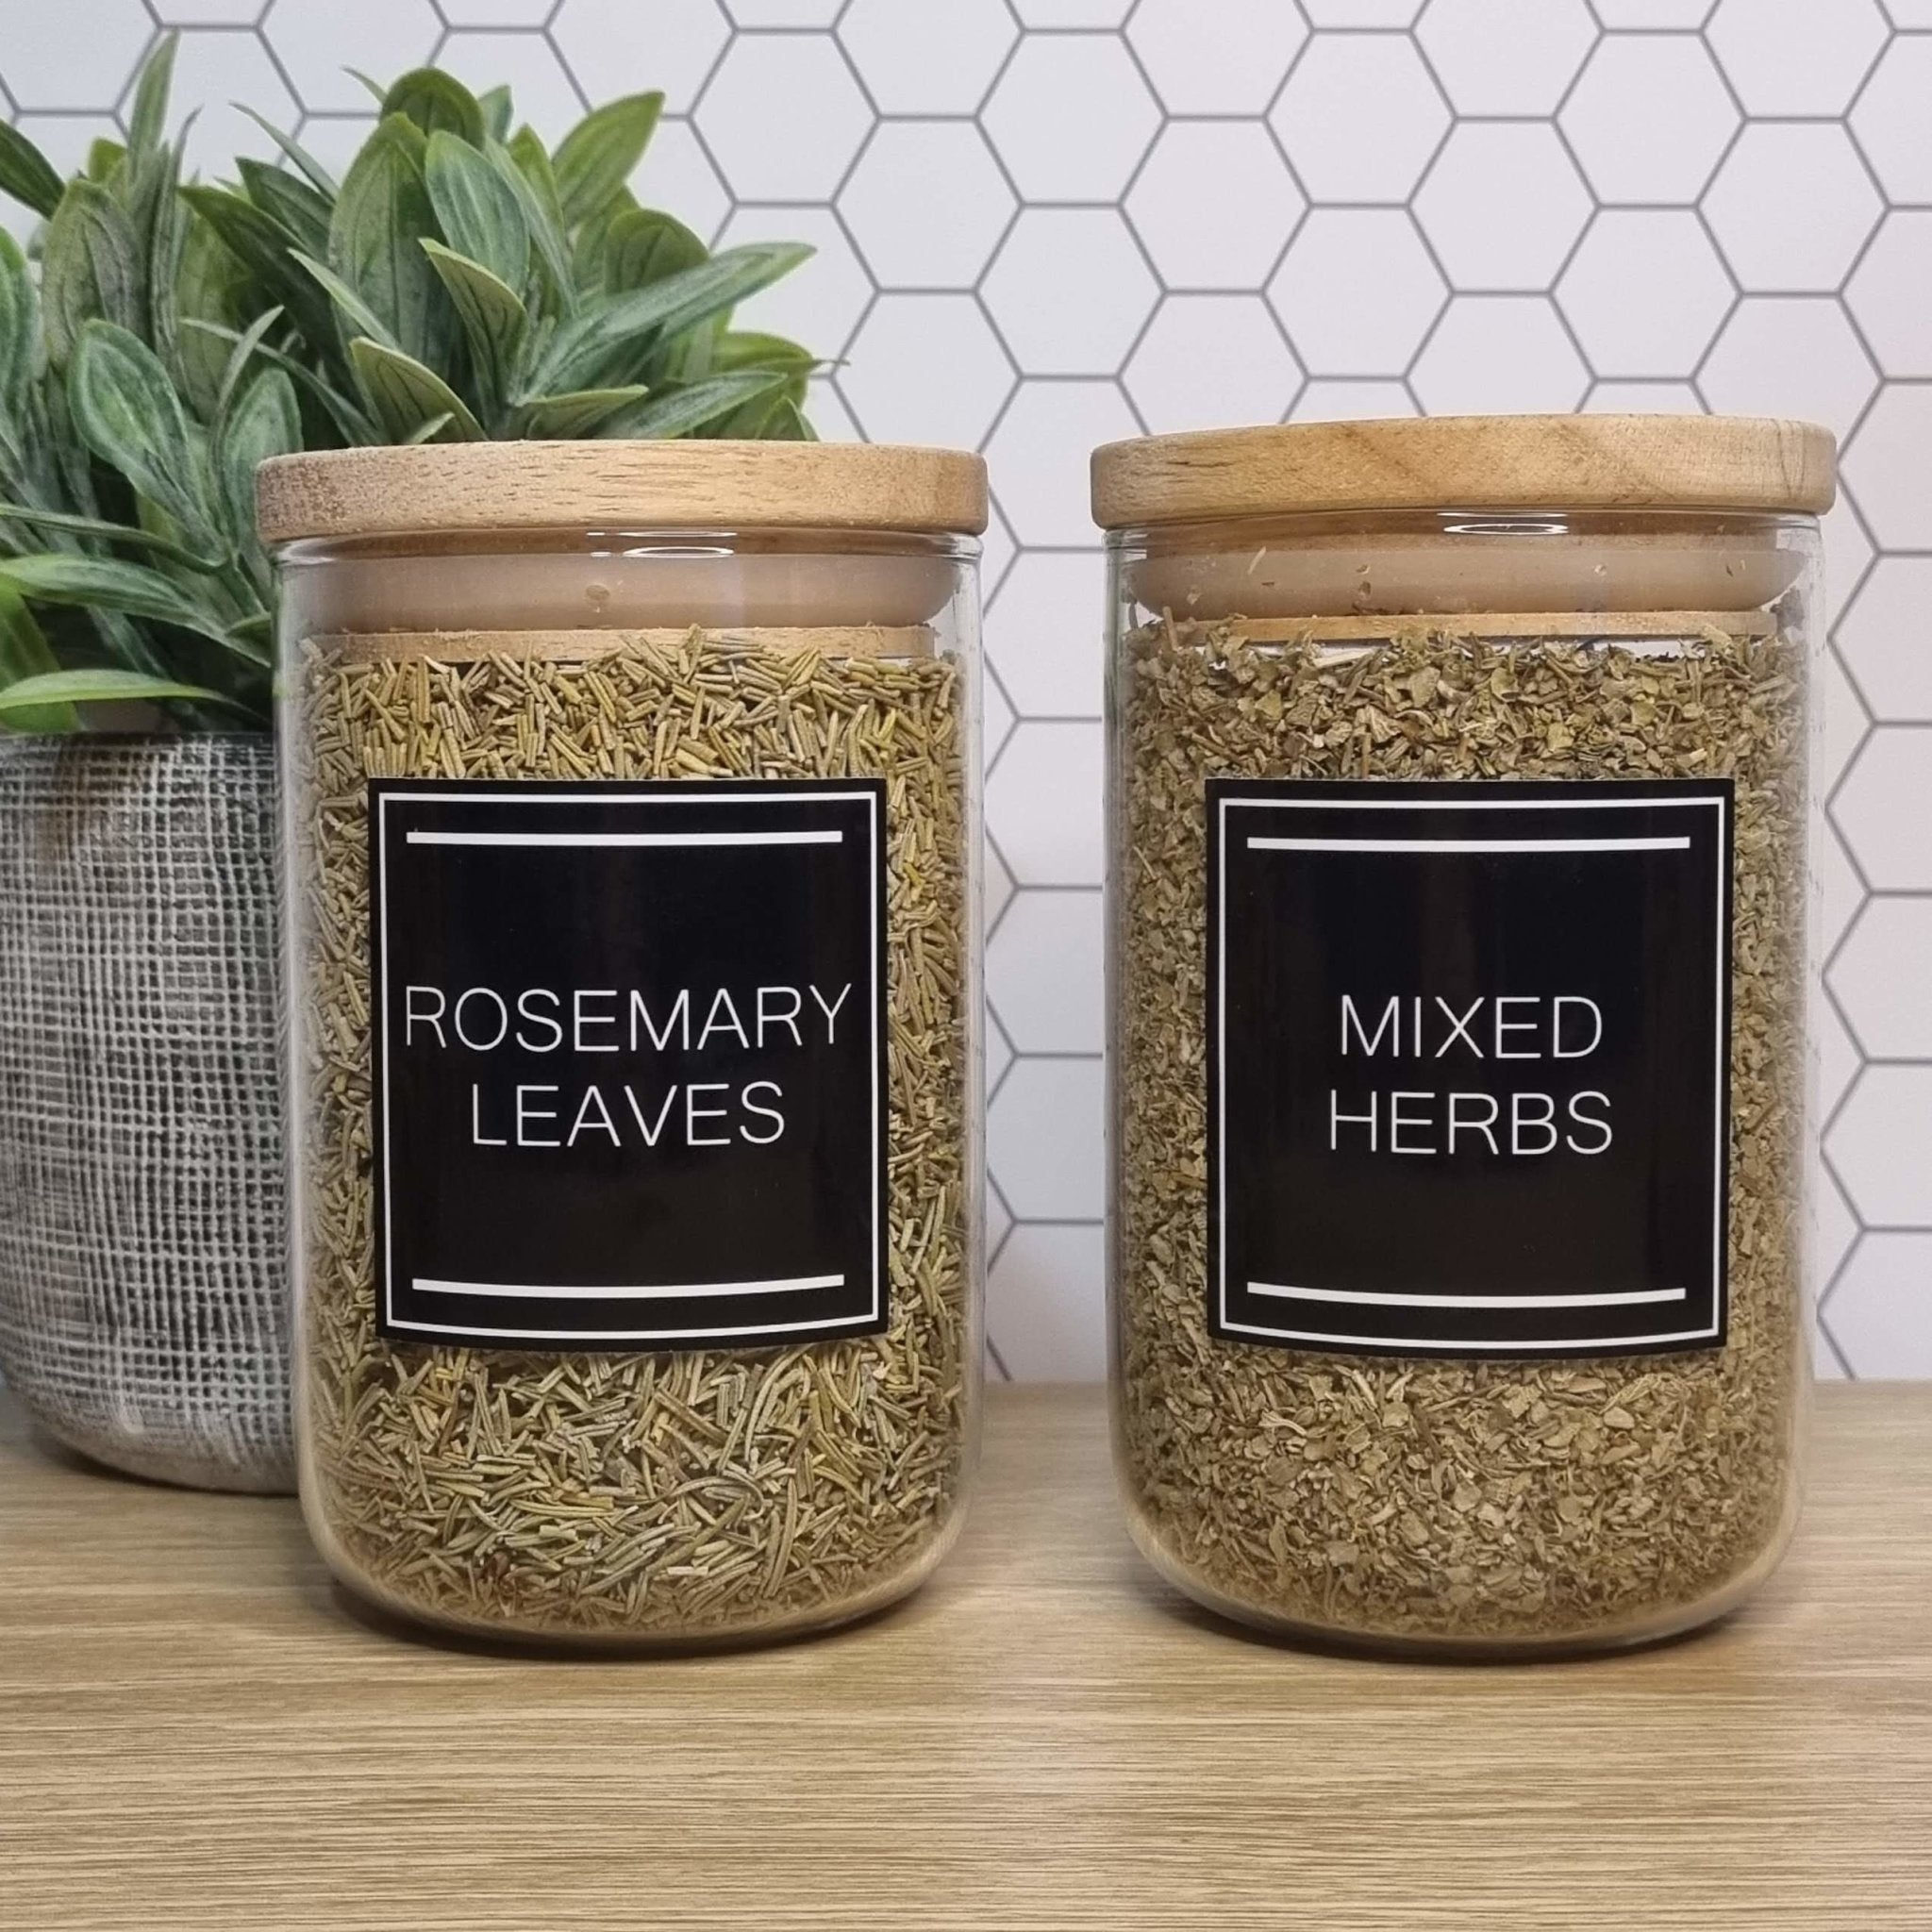 Custom Pantry Labels, Small Labels, Spice Jars, Herb Labels, Spice